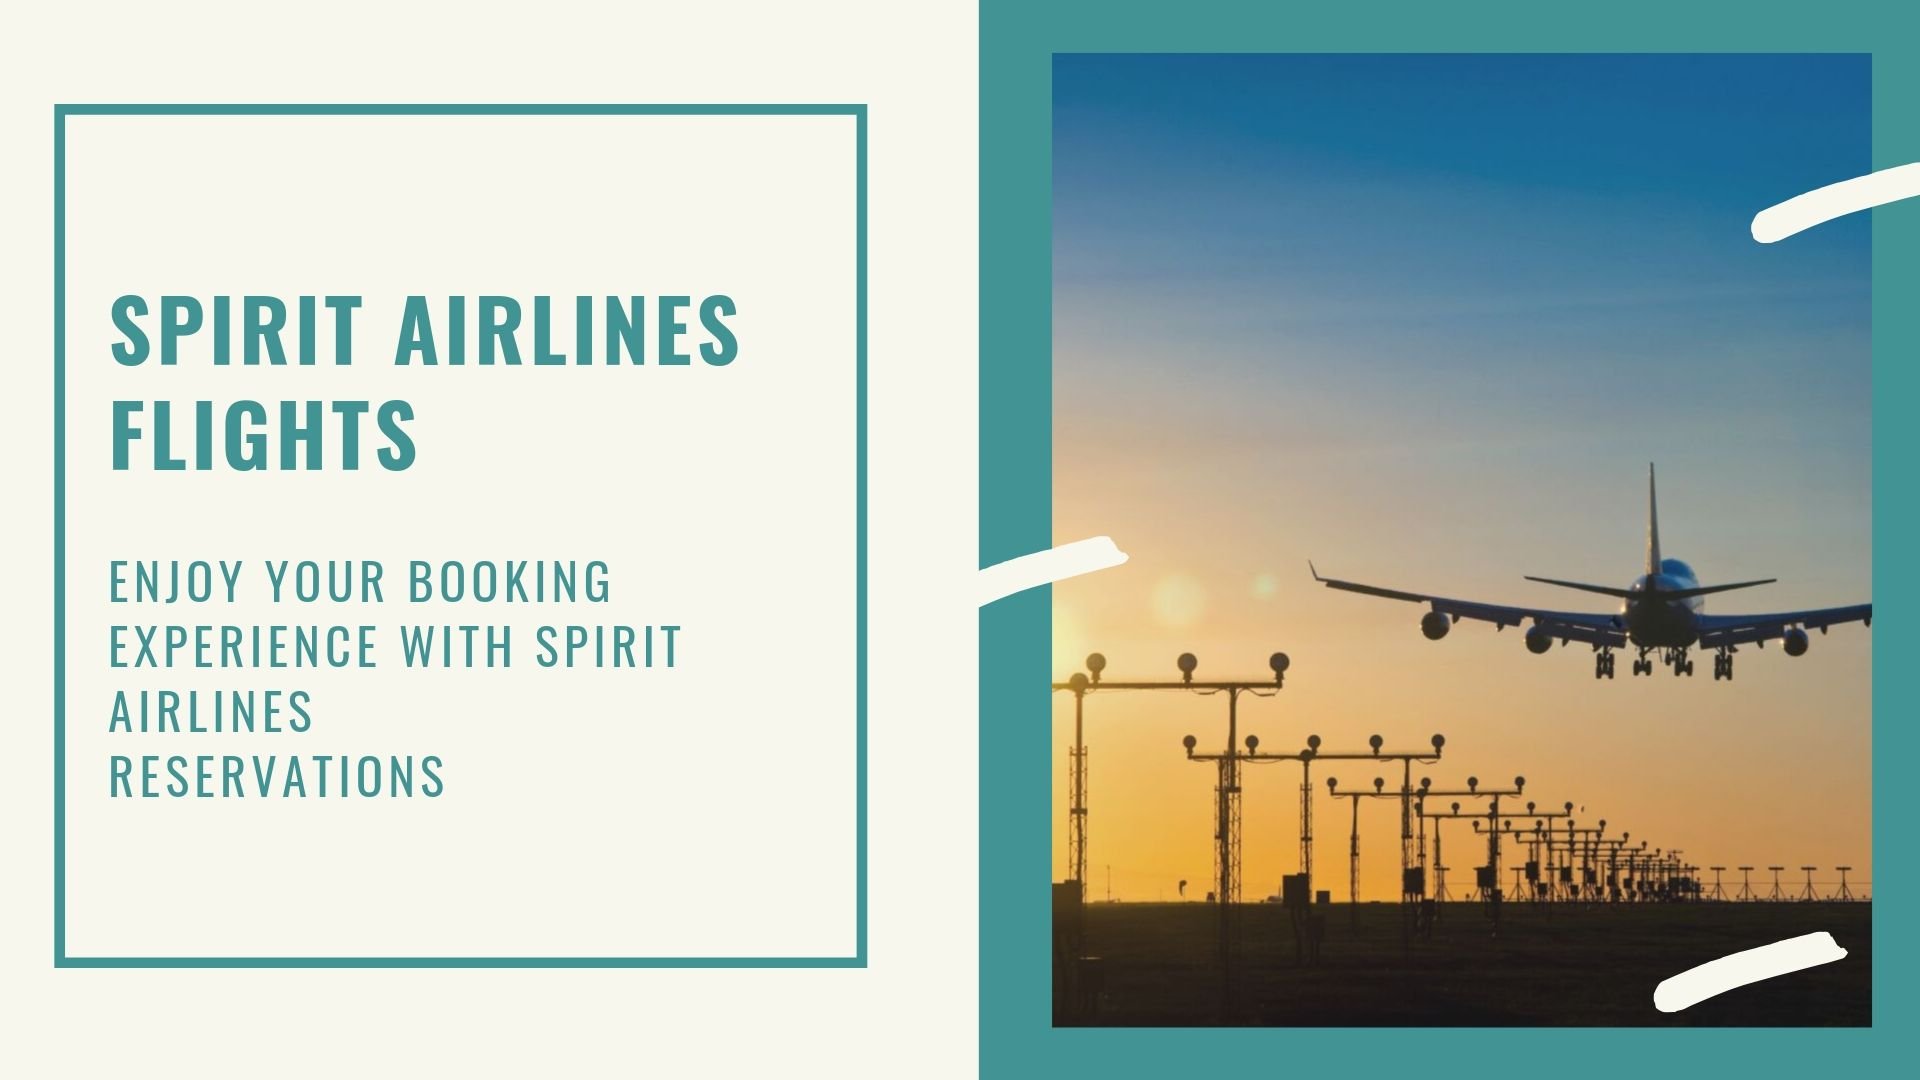 Enjoy Your Booking Experience with Spirit Airlines Reservations